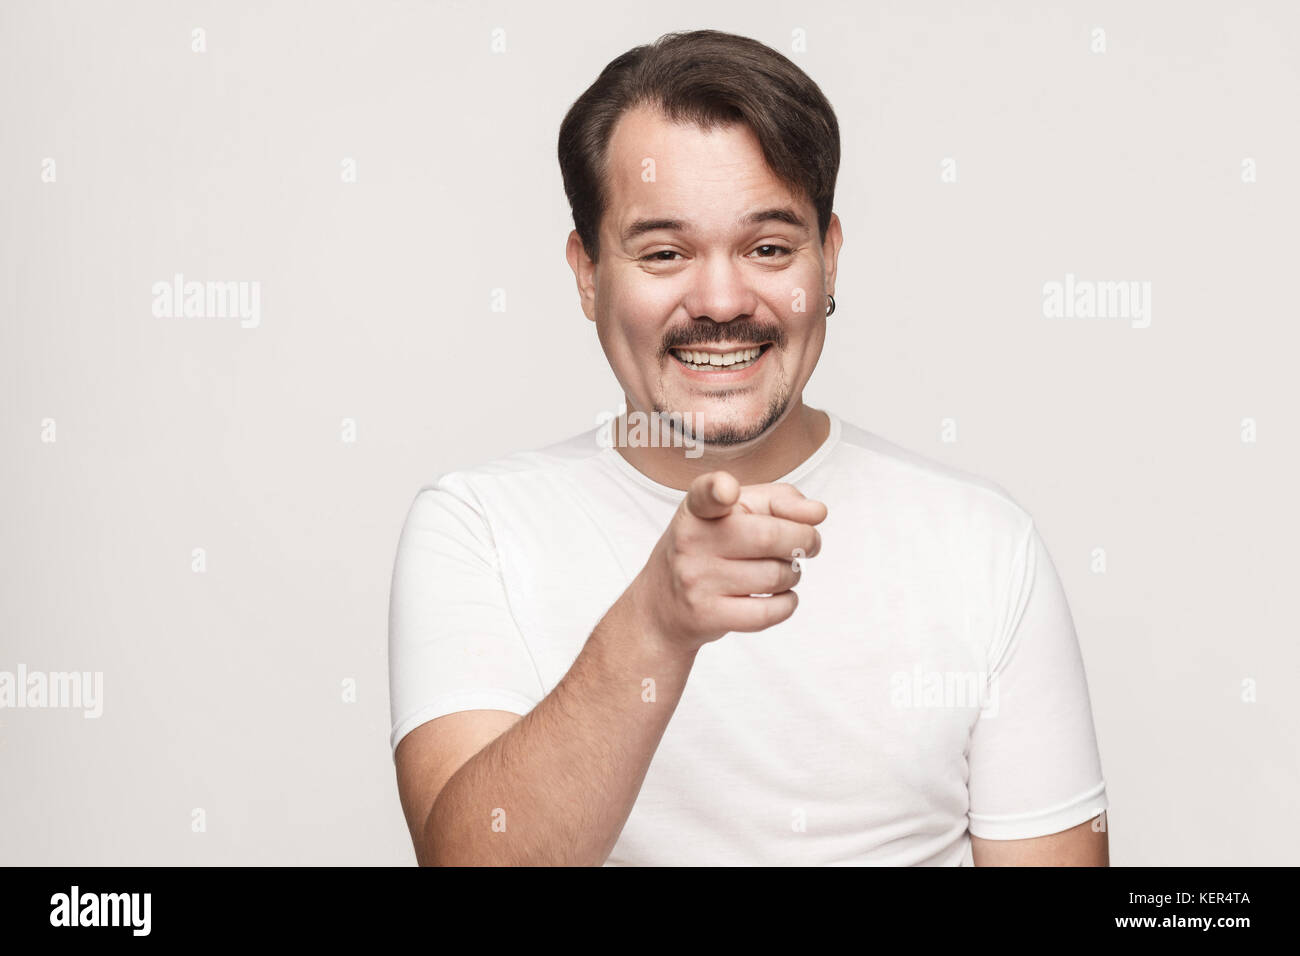 The happiness man, wearing white tshirt, having happiness looks, pointing finger at camera and toothy smiling. Isolated studio shot on gray background Stock Photo